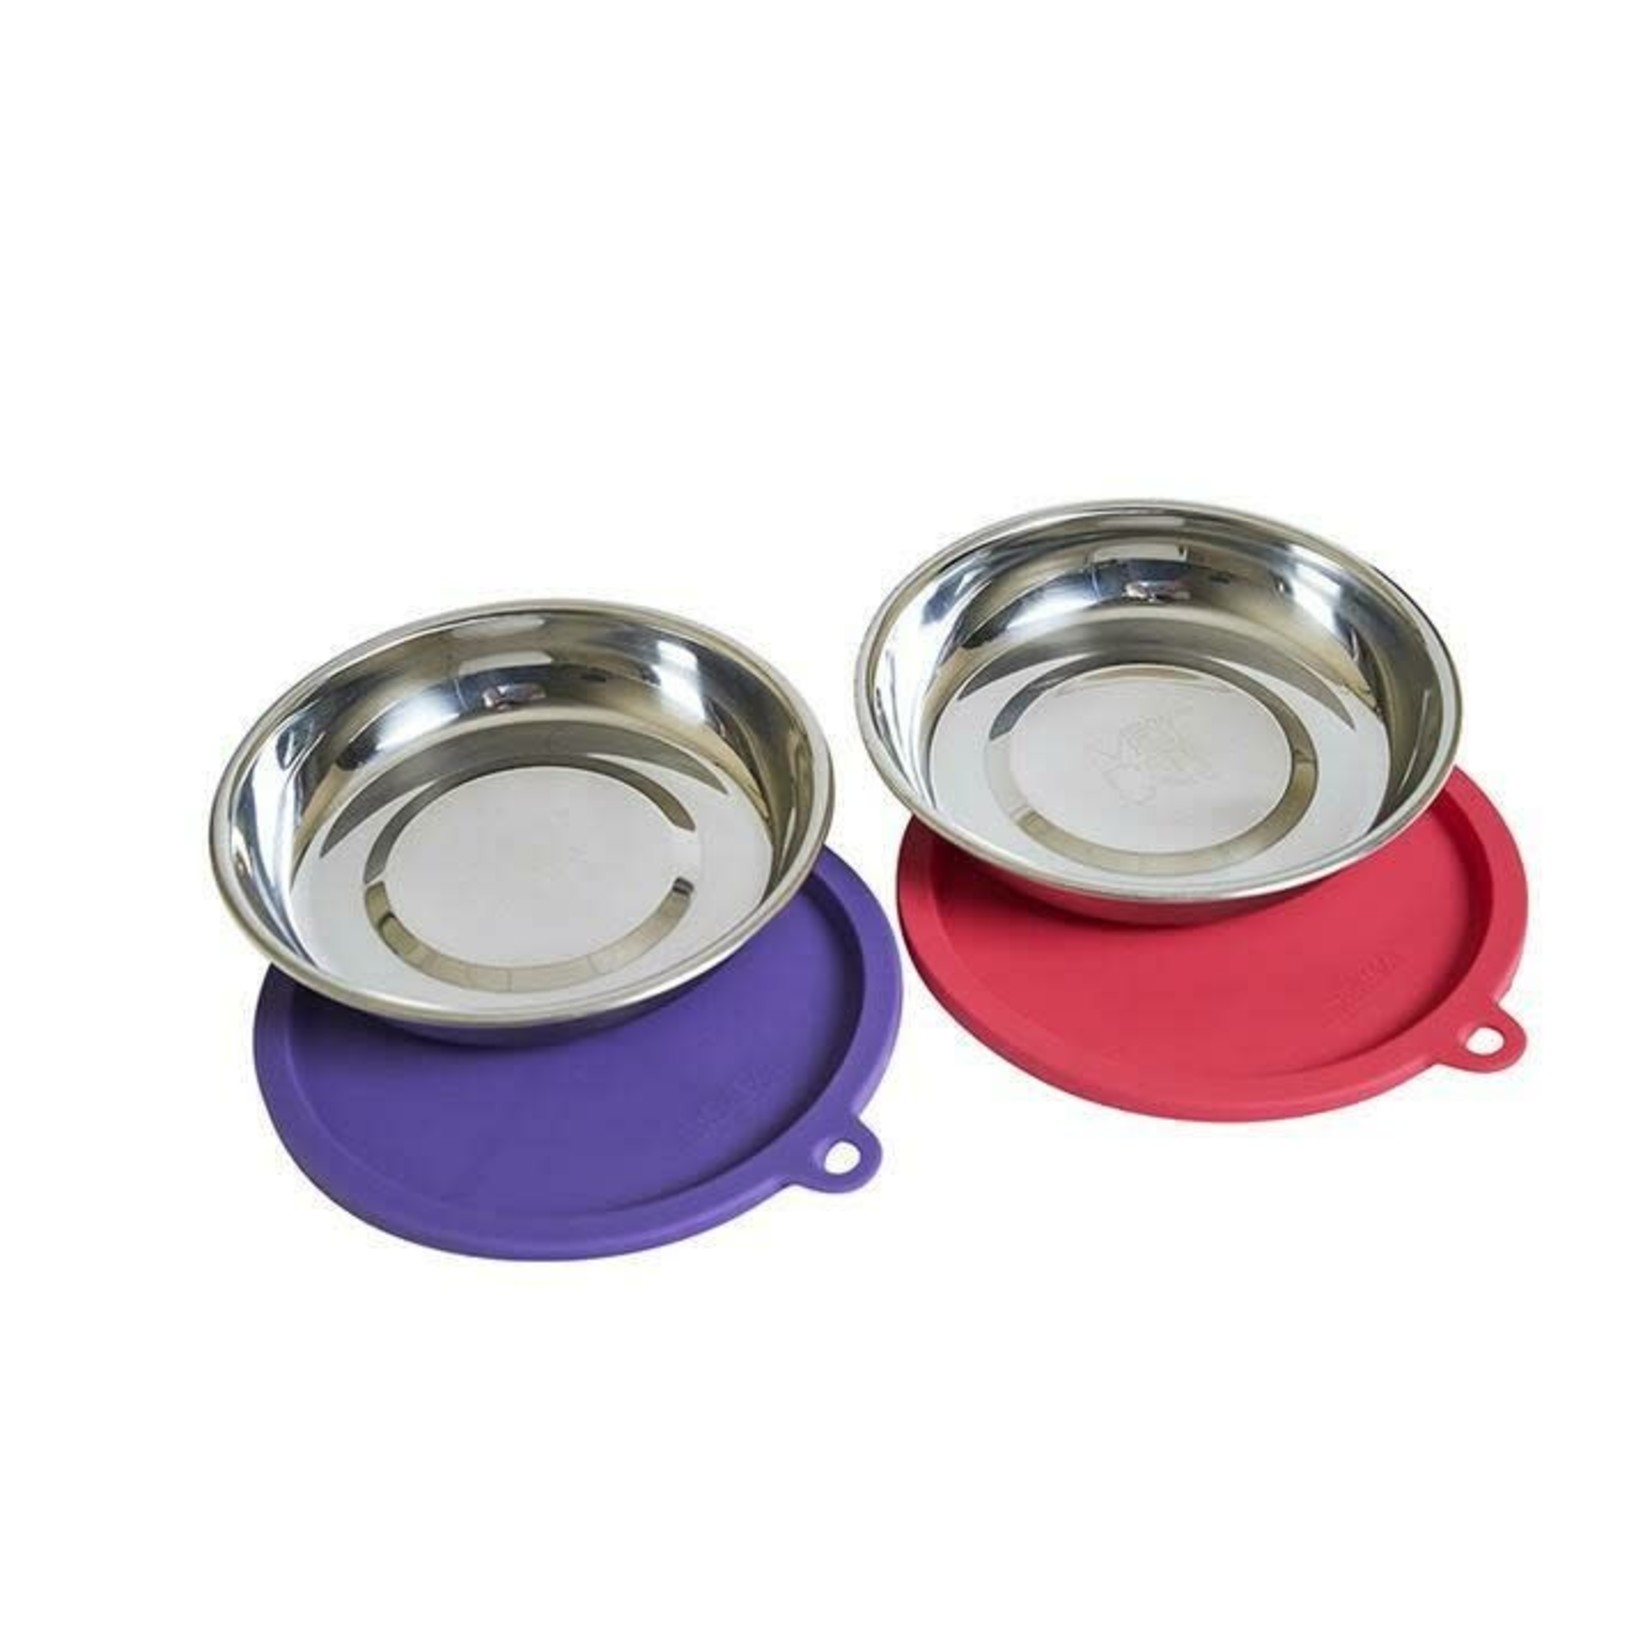 Messy Cats Messy Cats: Stainless Saucers with Silicone Lids: 4pc Set